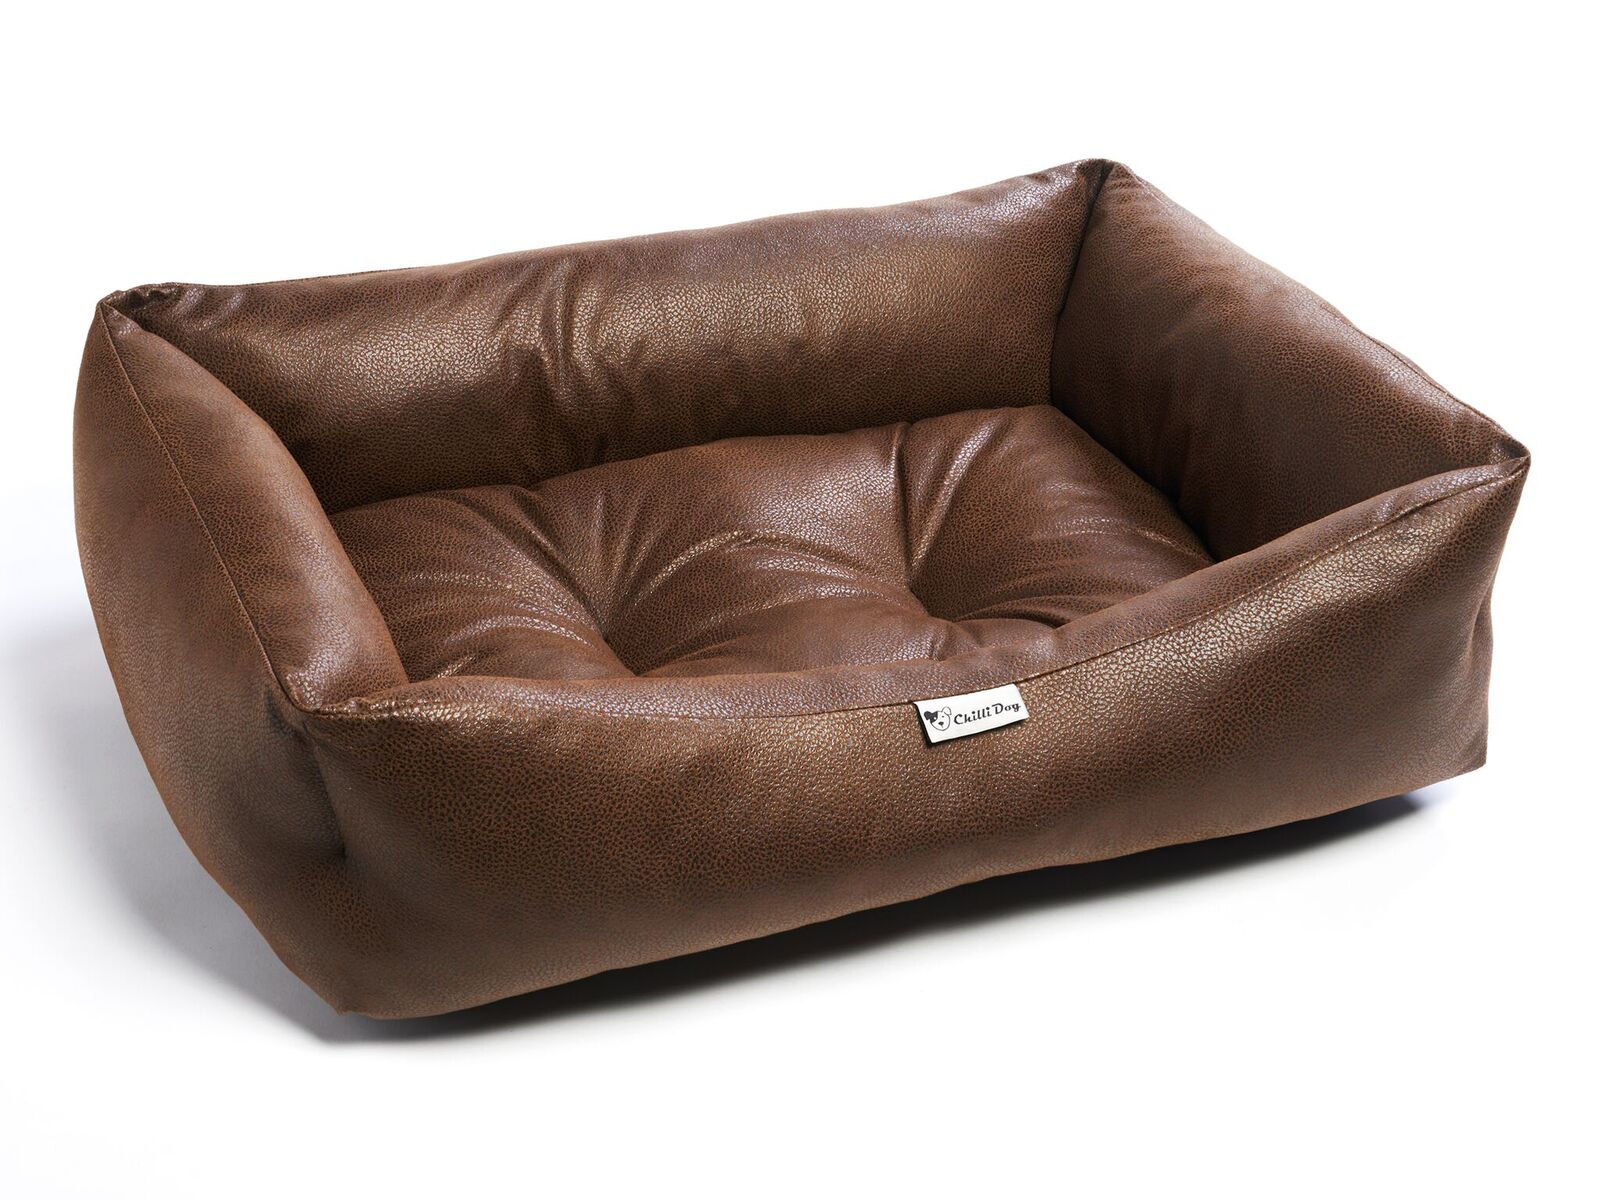 Brown Black Luxury Faux Leather Dog Bed, Black Leather Dog Bed